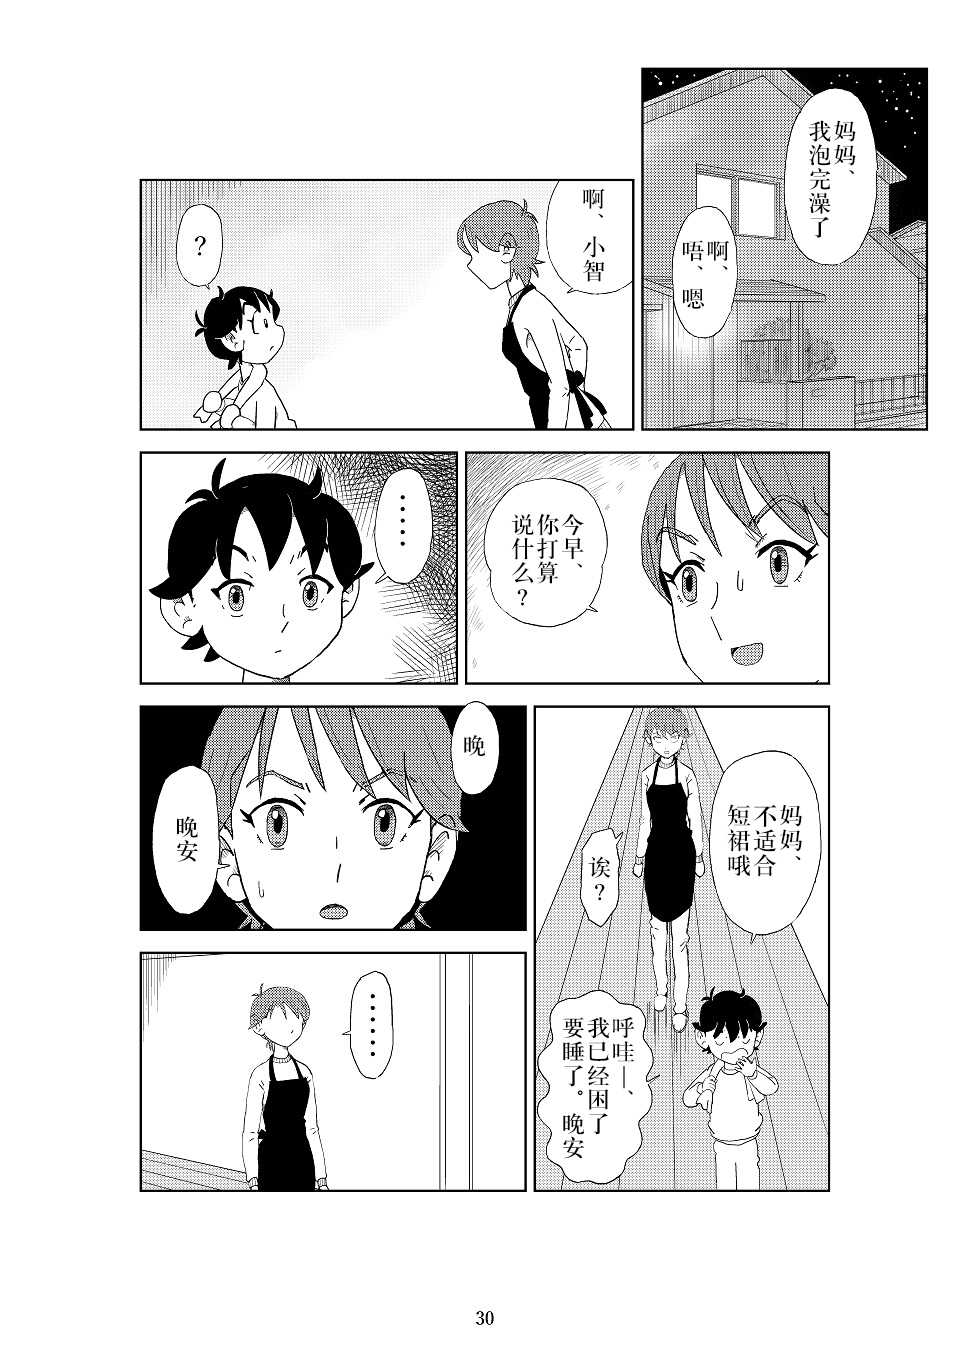 Page 33 - [N.R.D.WORKS] Futoshi 2 [Chinese] [新桥月白日语社 